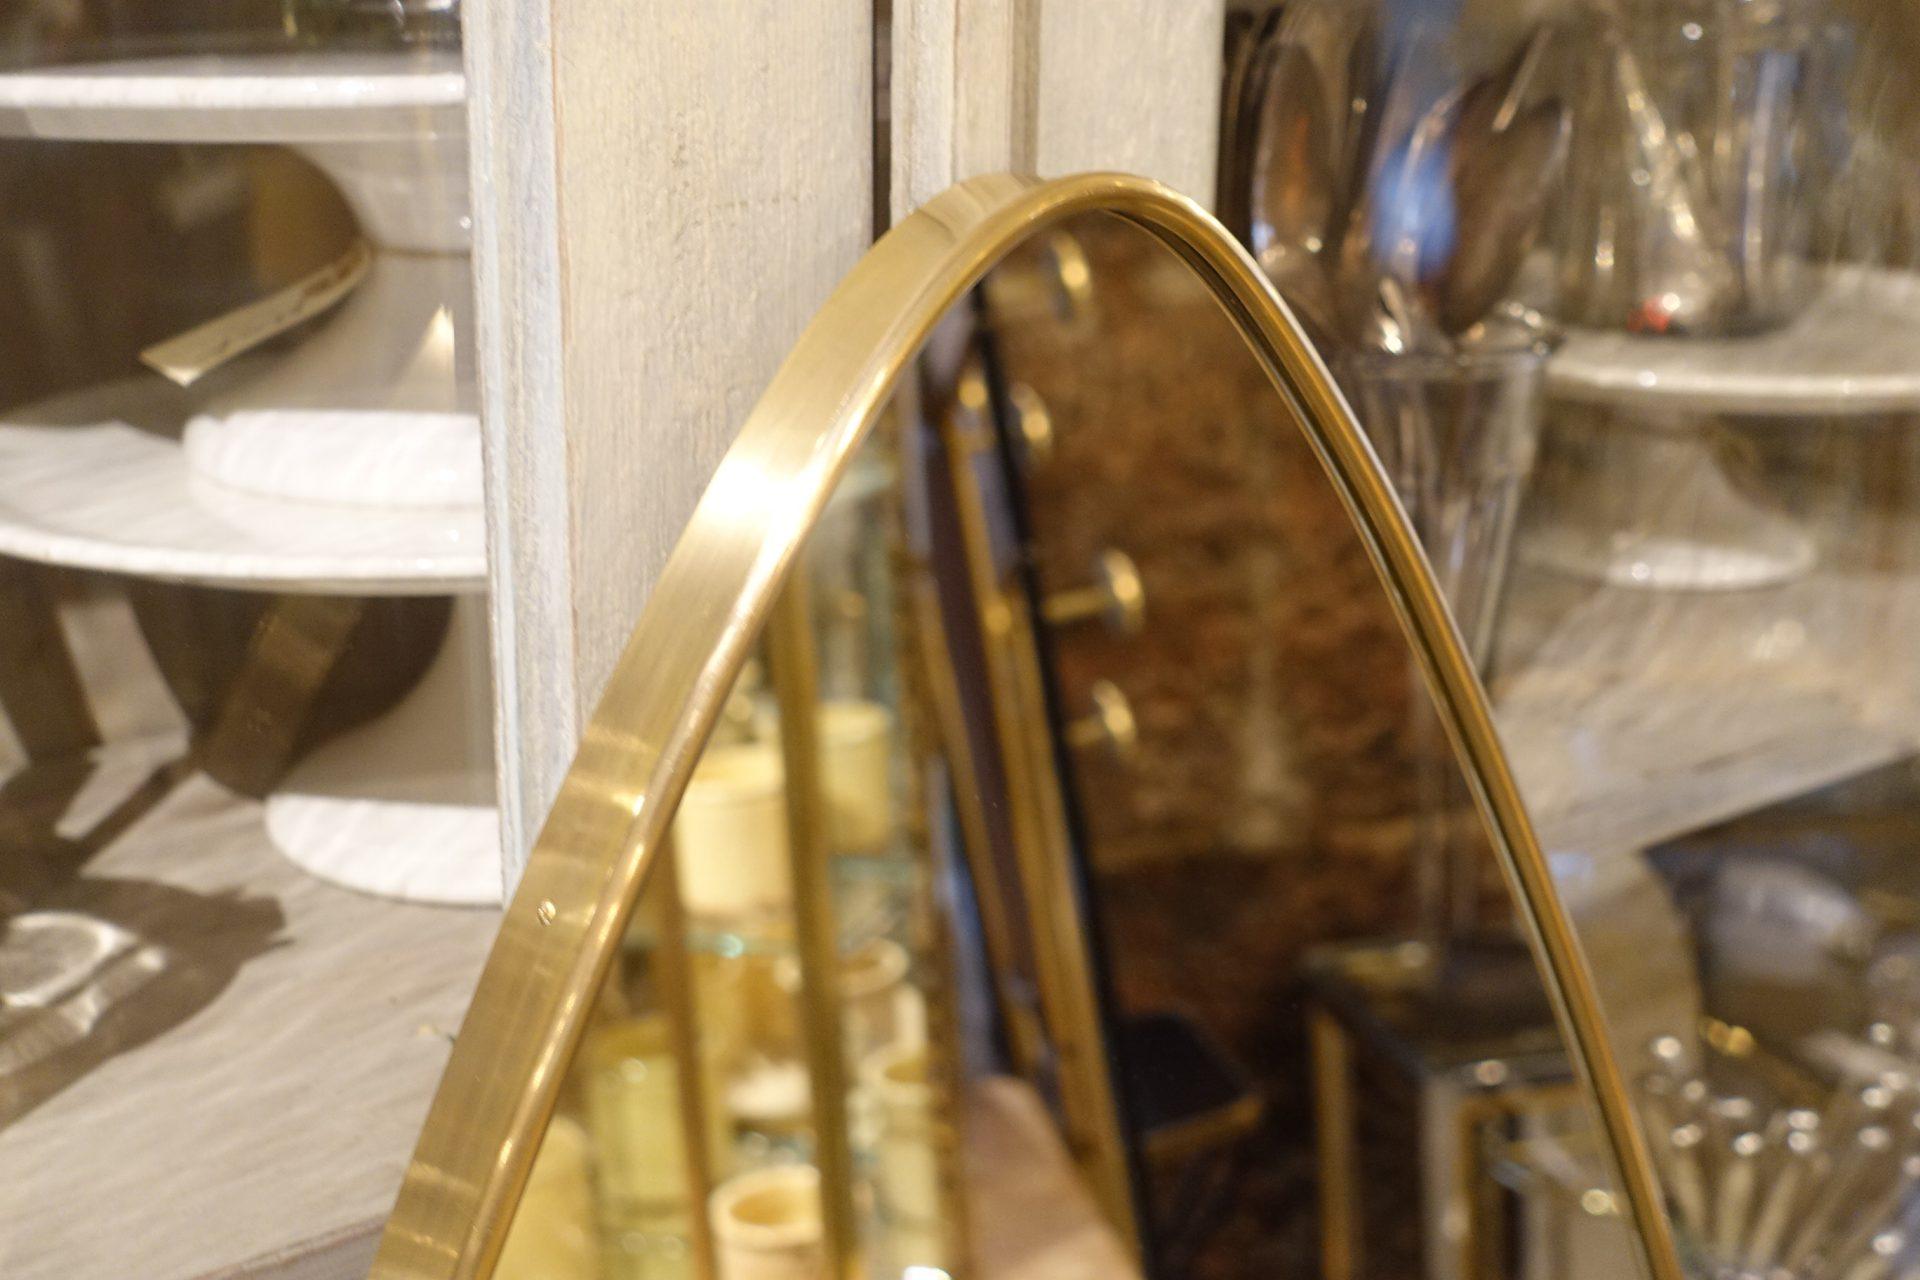 Handsome vintage oblong brass mirror from midcentury, Italy. Beautiful tapered oval shape with rounded ends. The mirror is stylistically similar to designer Giò Ponti’s mirrors and has mounting brackets behind. Notice the elegant and sleek brass